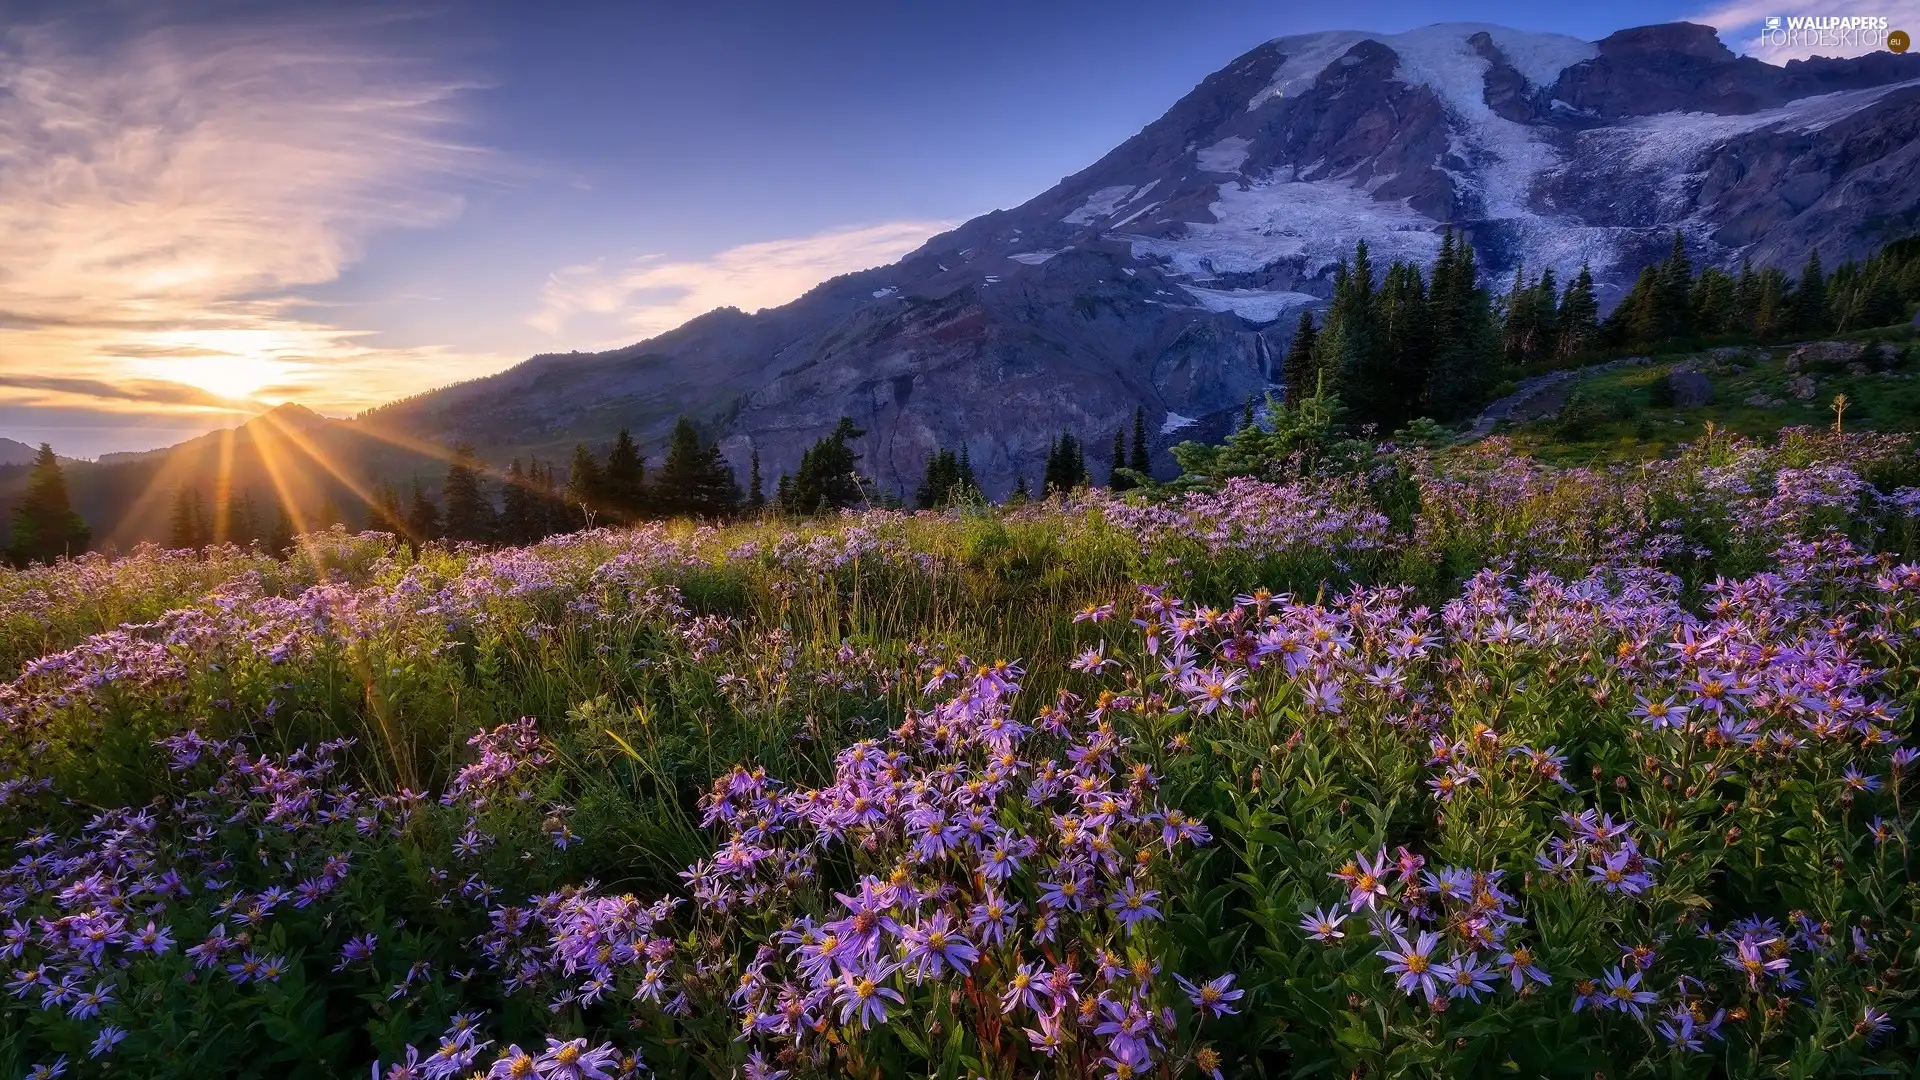 Mount Rainier National Park, The United States, Stratovolcano Mount Rainier, Meadow, viewes, Mountains, rays of the Sun, trees, Flowers